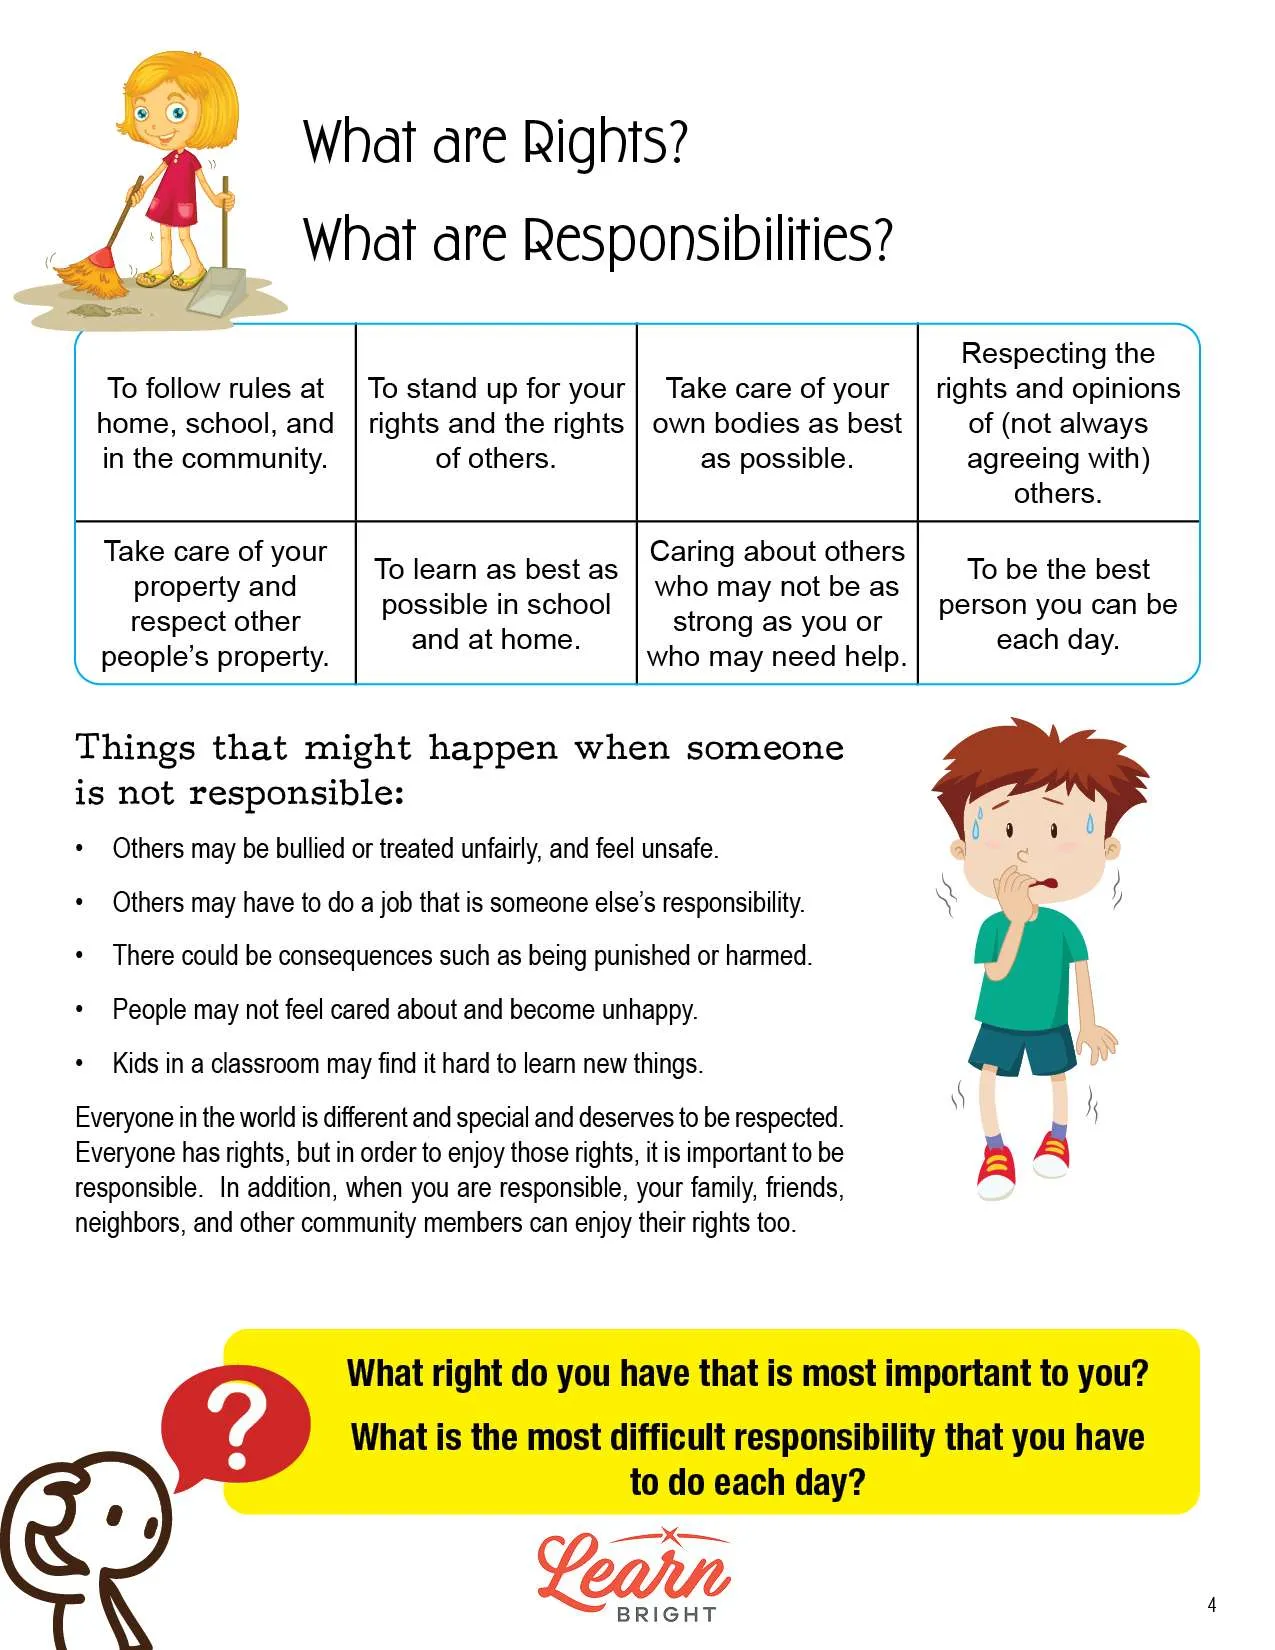 write a speech about rights and responsibilities cannot be separated